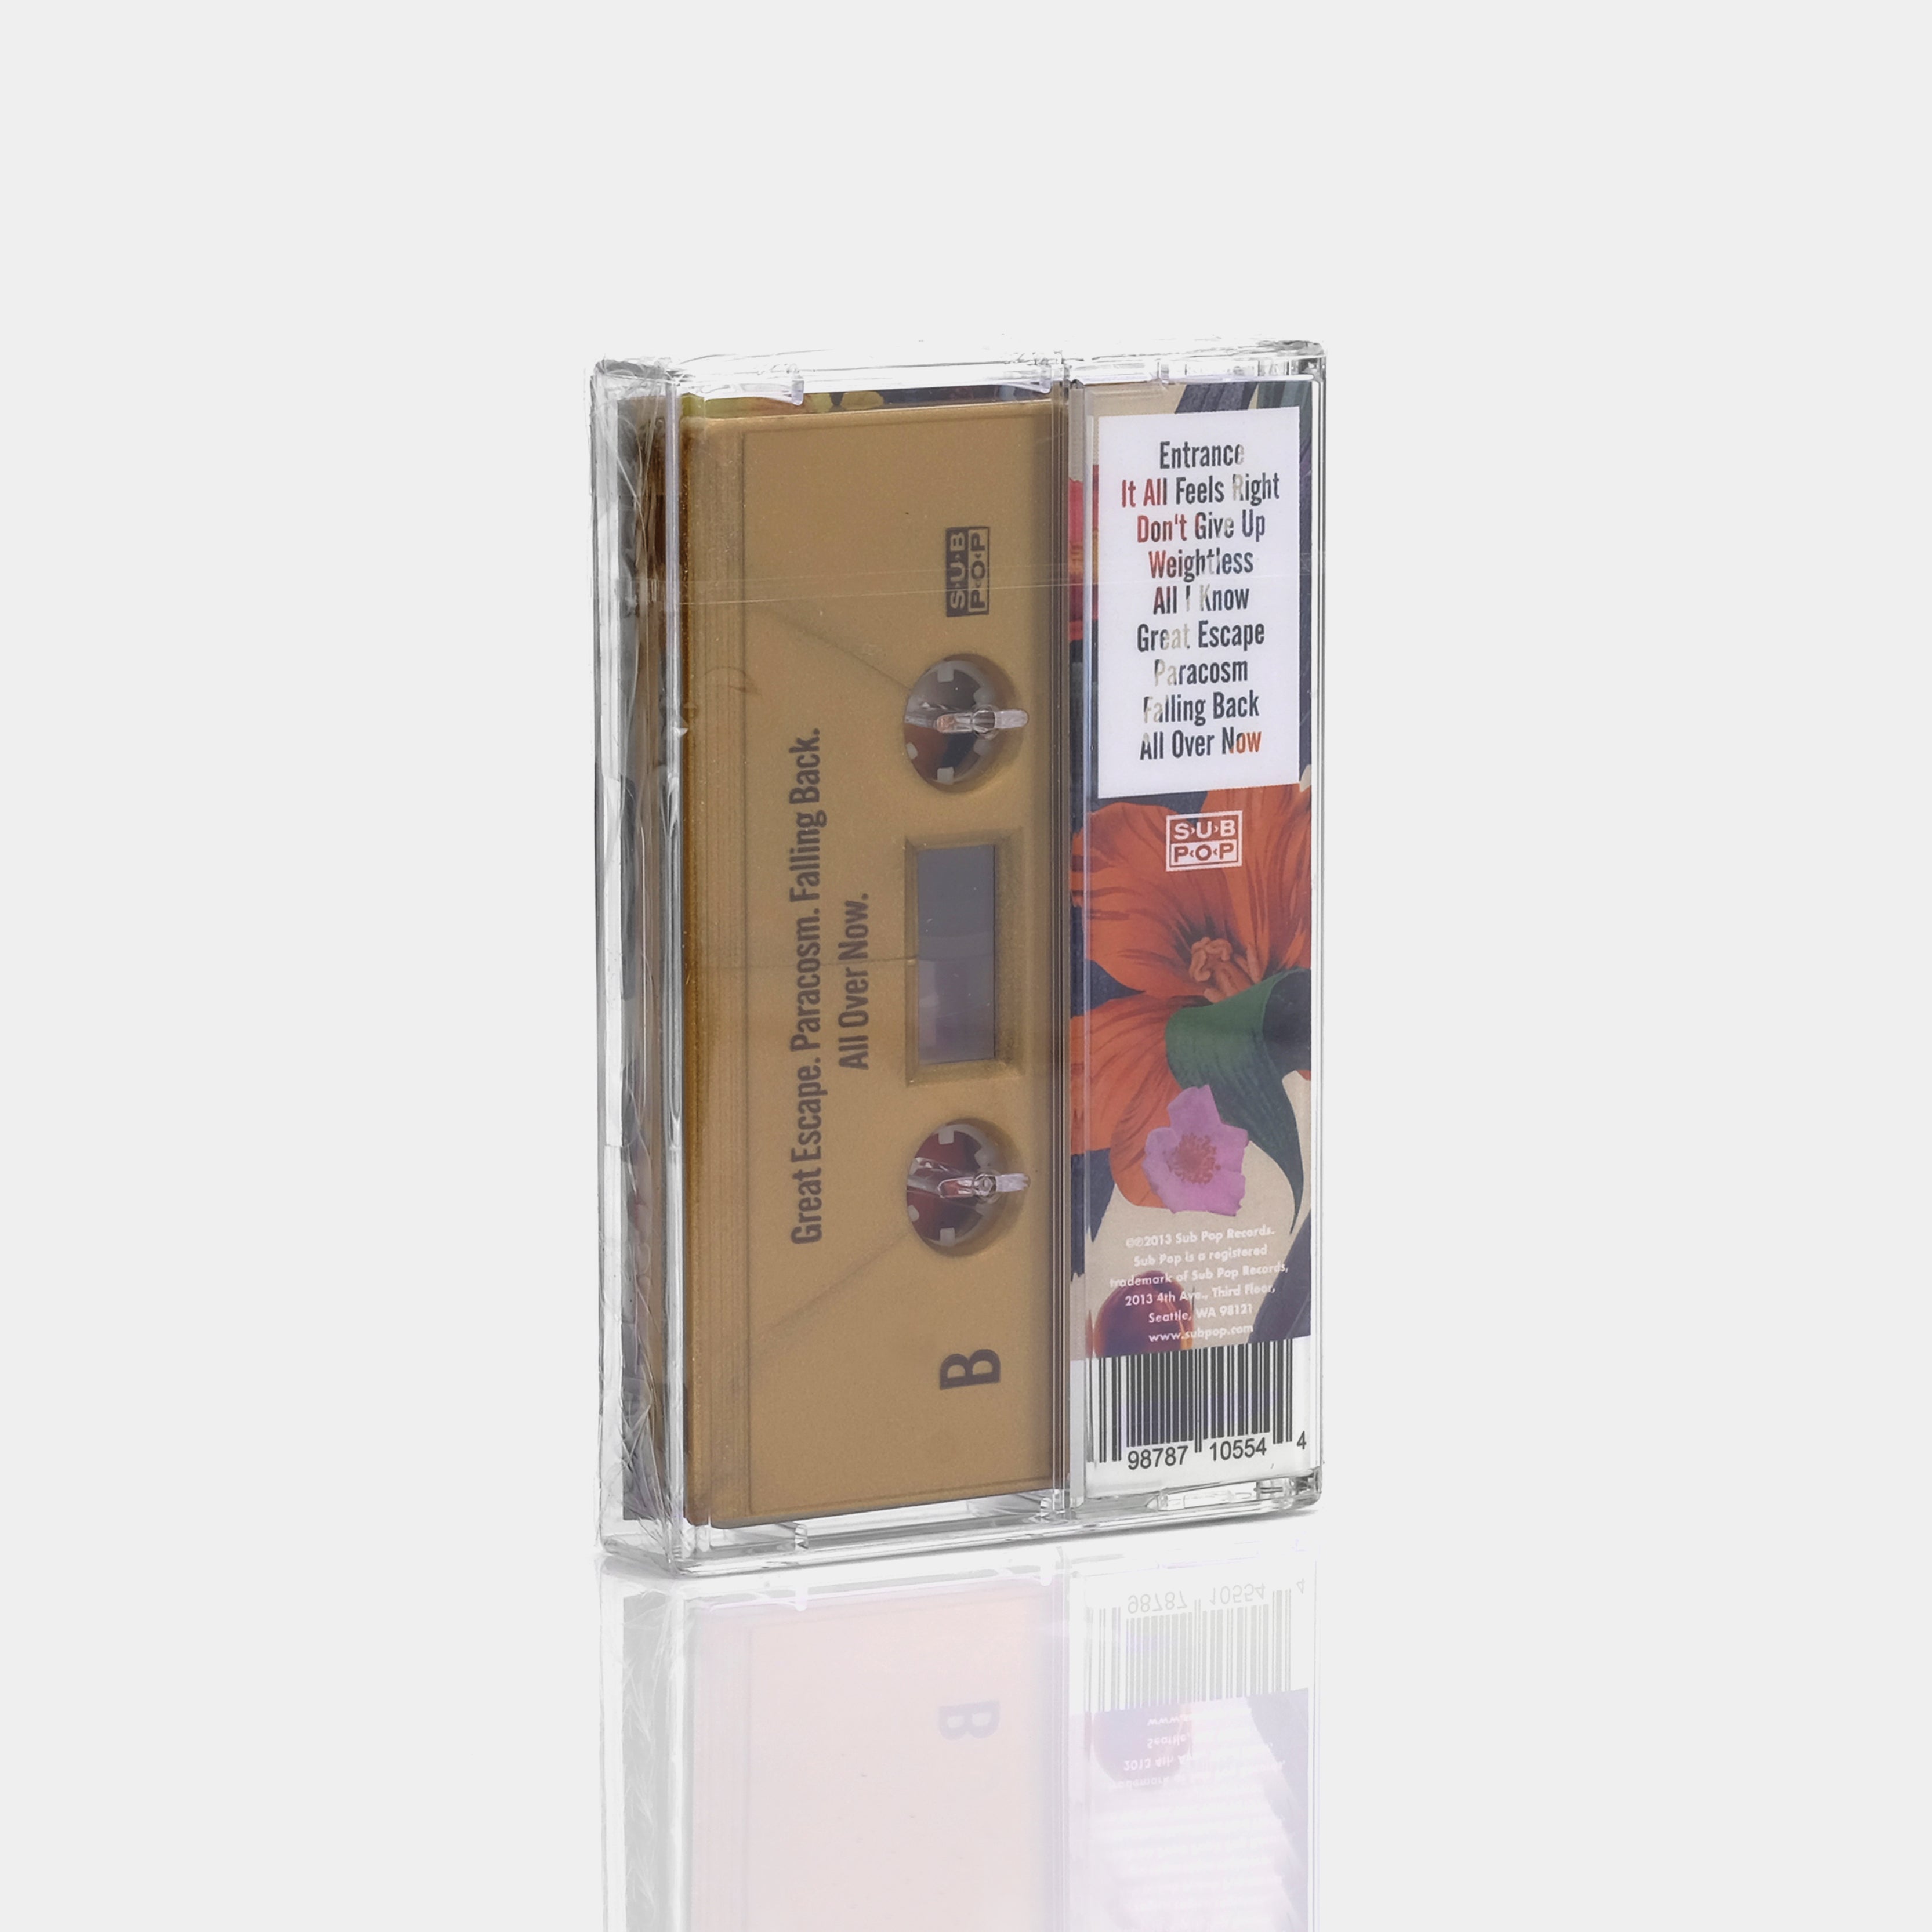 Washed Out - Paracosm Cassette Tape